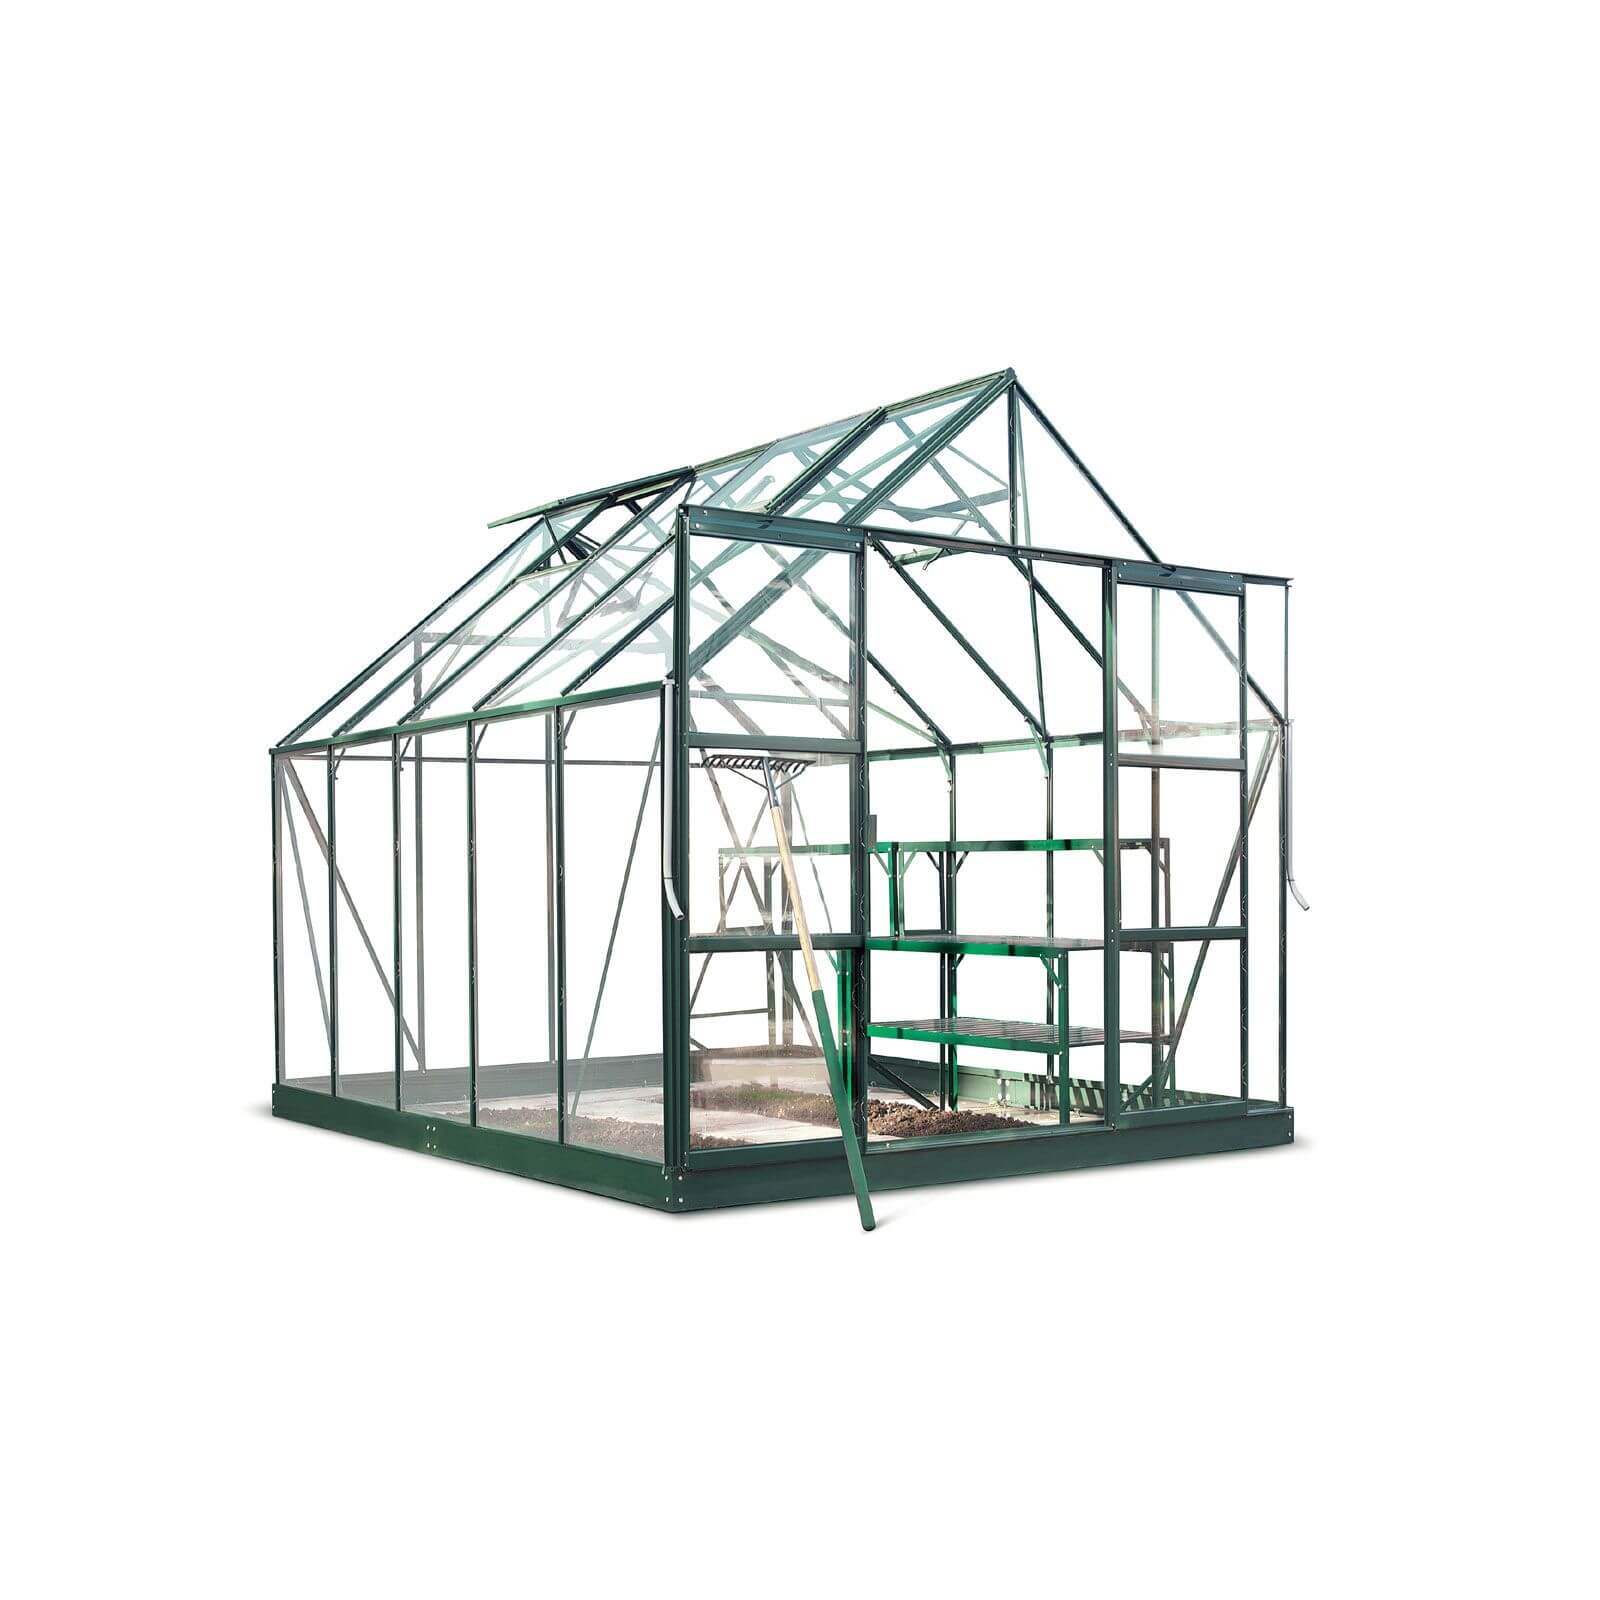 Halls 10 x 8ft Aluminium Magnum Green Greenhouse with Toughened Glass & Base